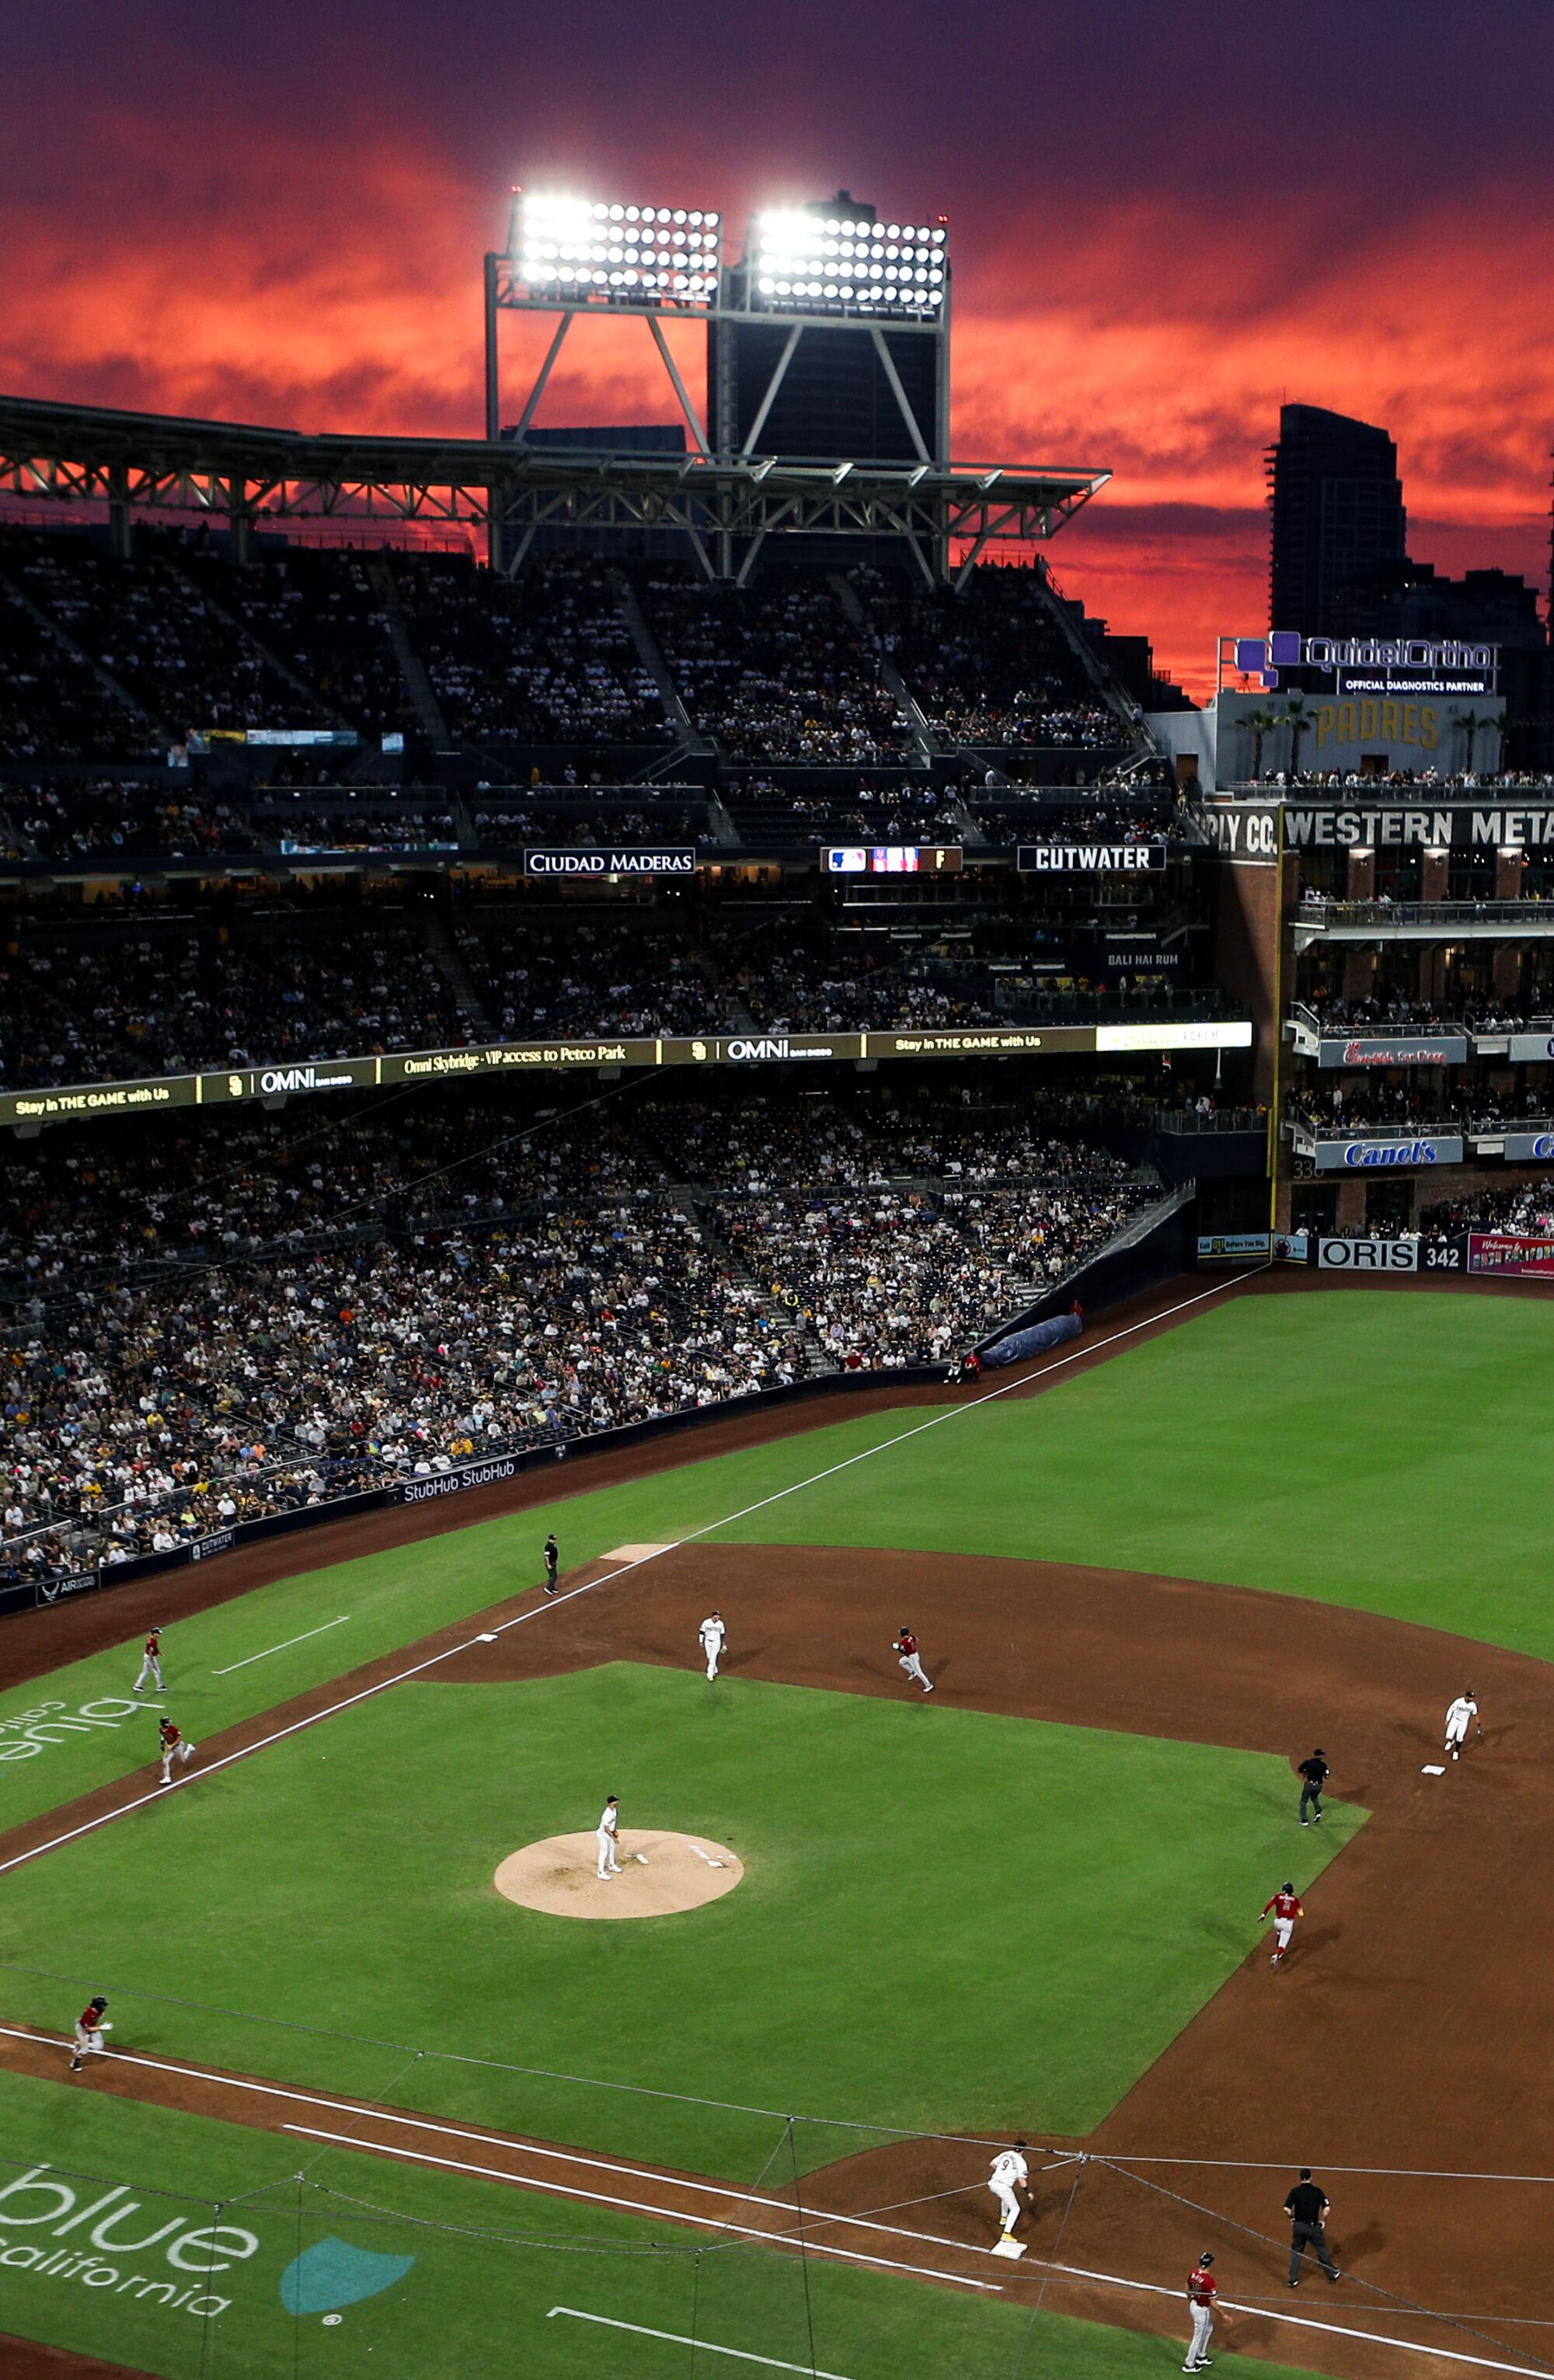 Brown's Corner – PCL Padres, baseball at its best